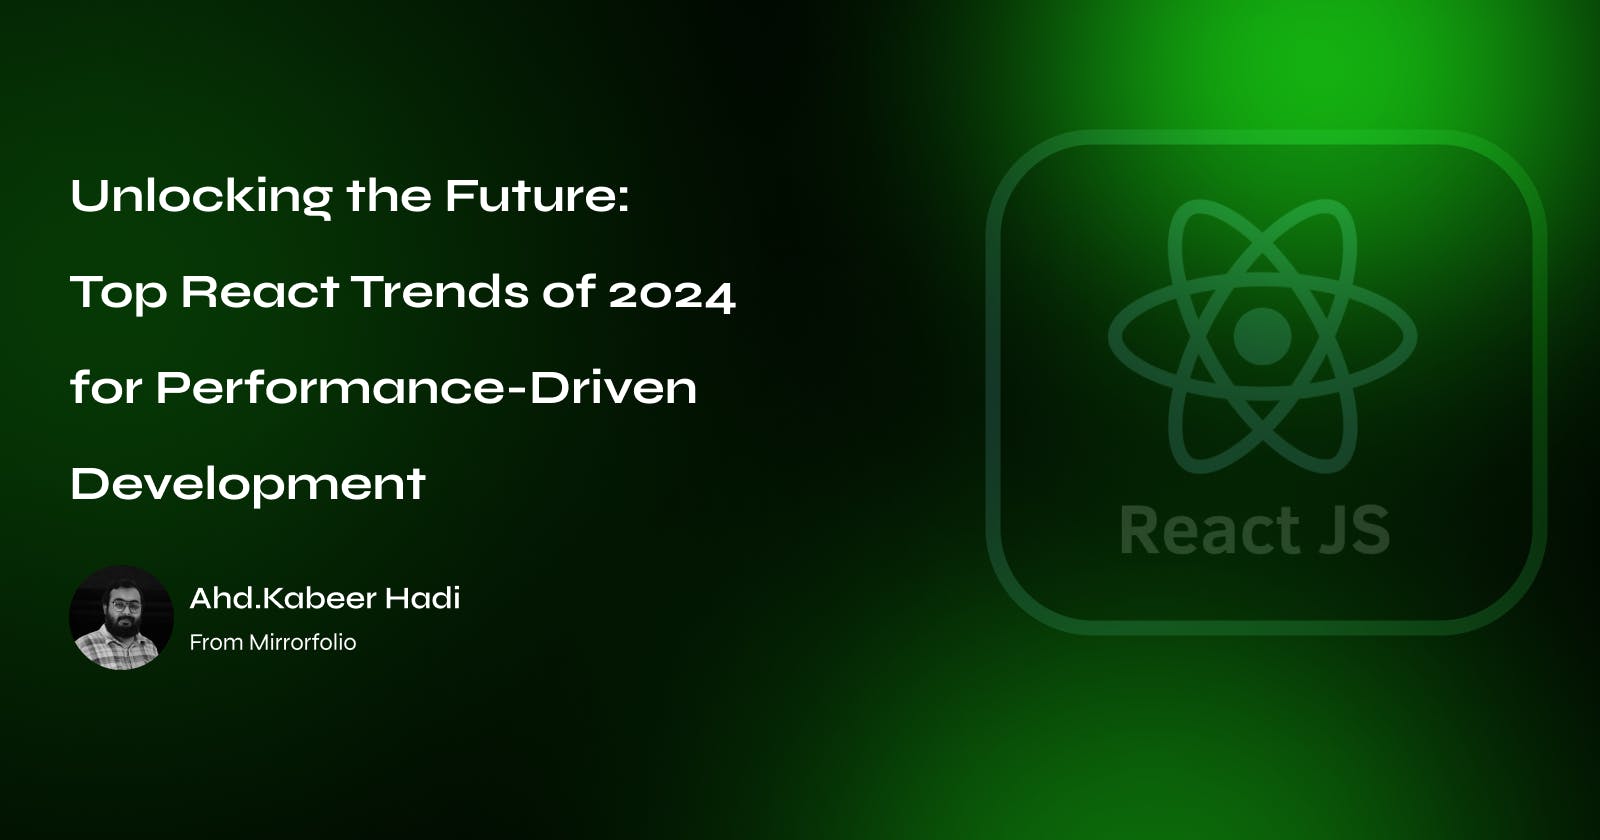 Unlocking the Future: Top React Trends of 2024 for Performance-Driven Development